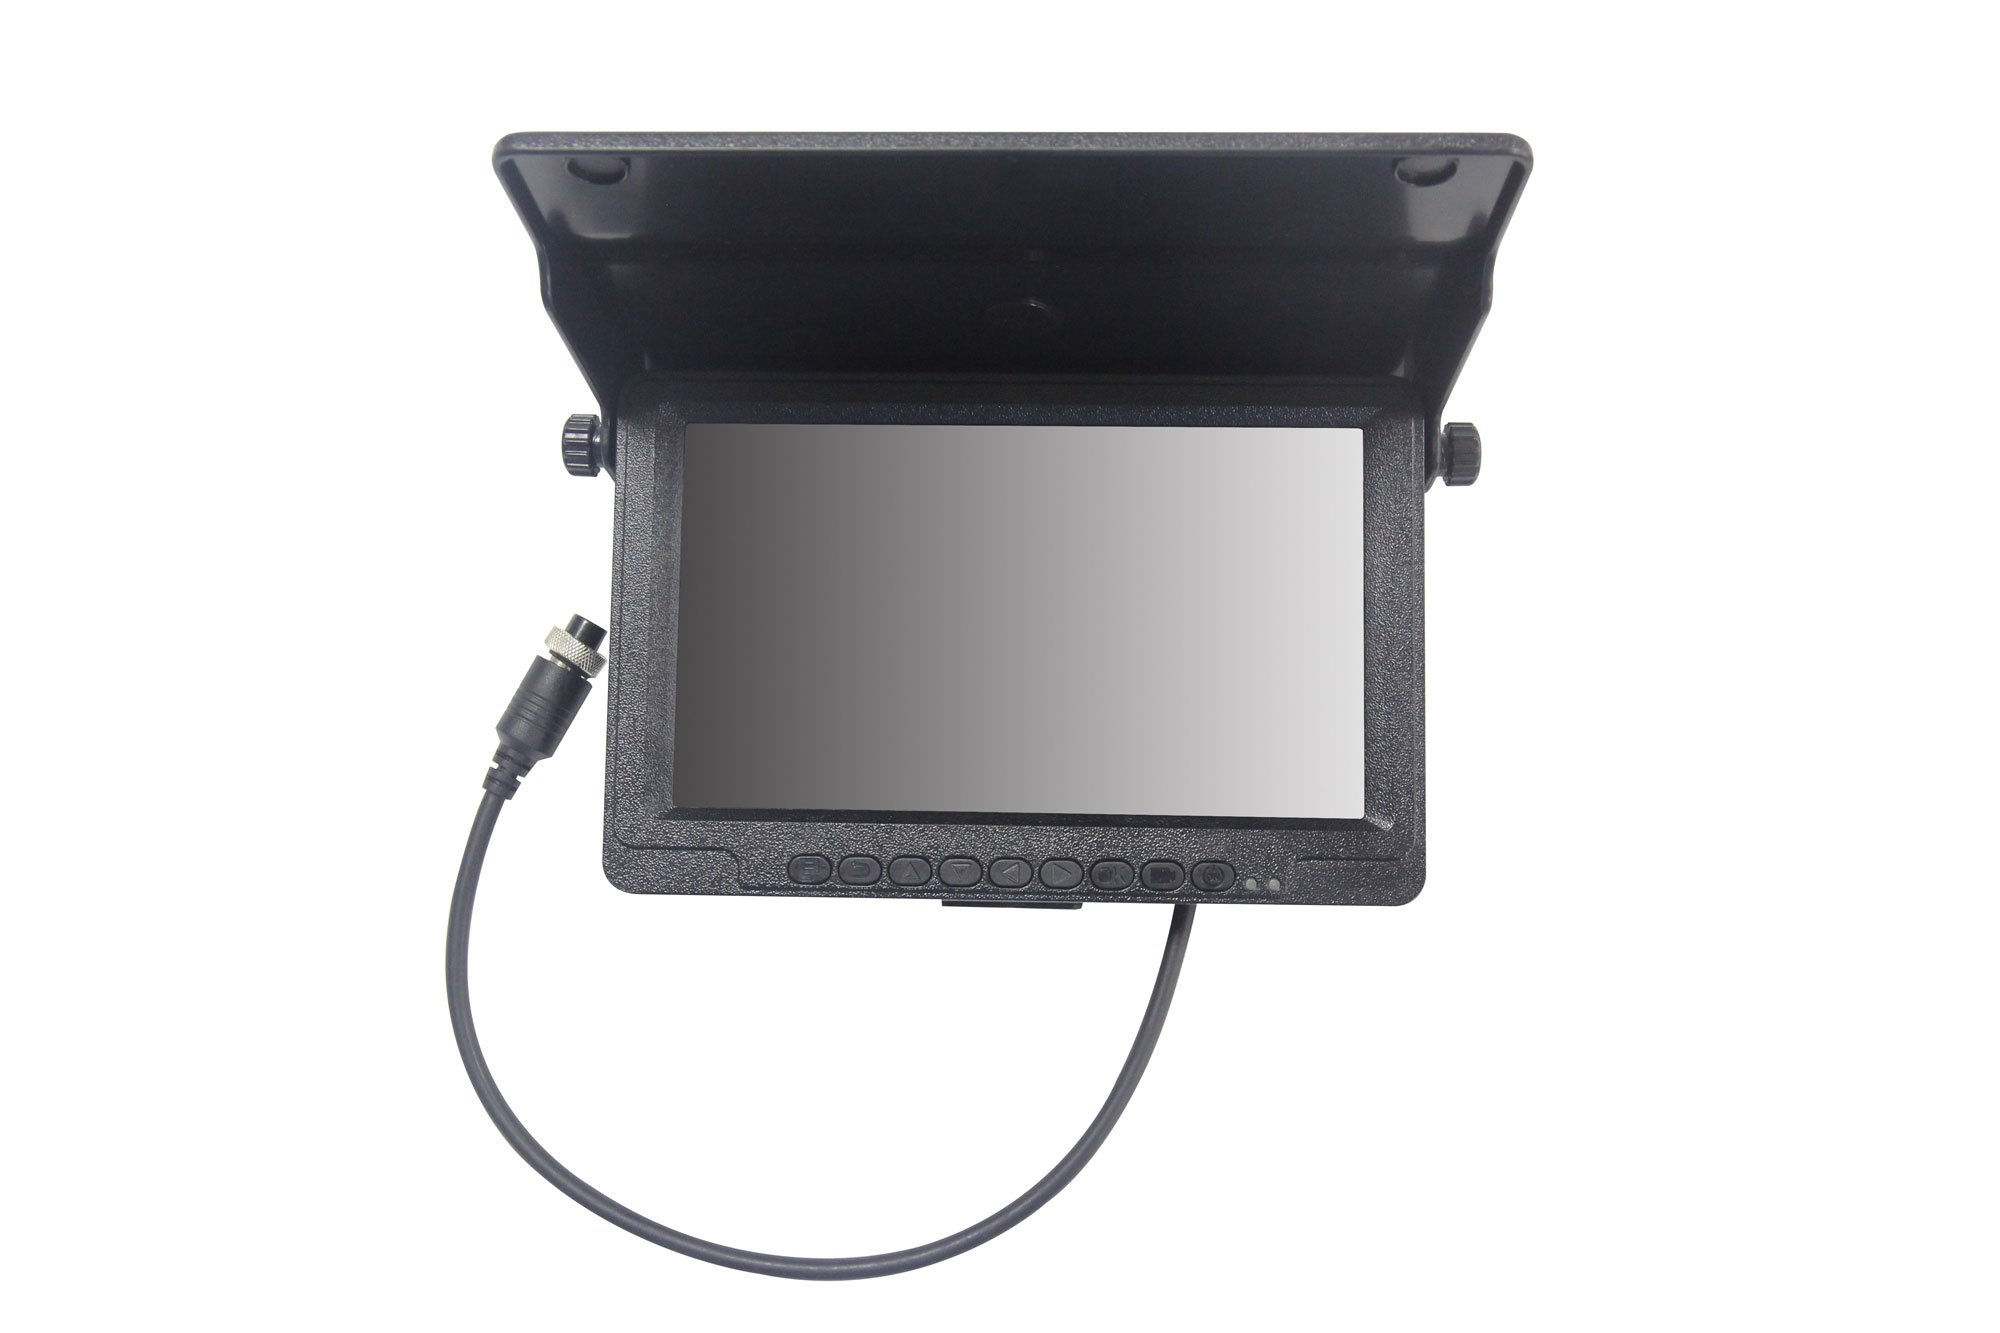 L3 7inch screen with Three-section telescopic rod